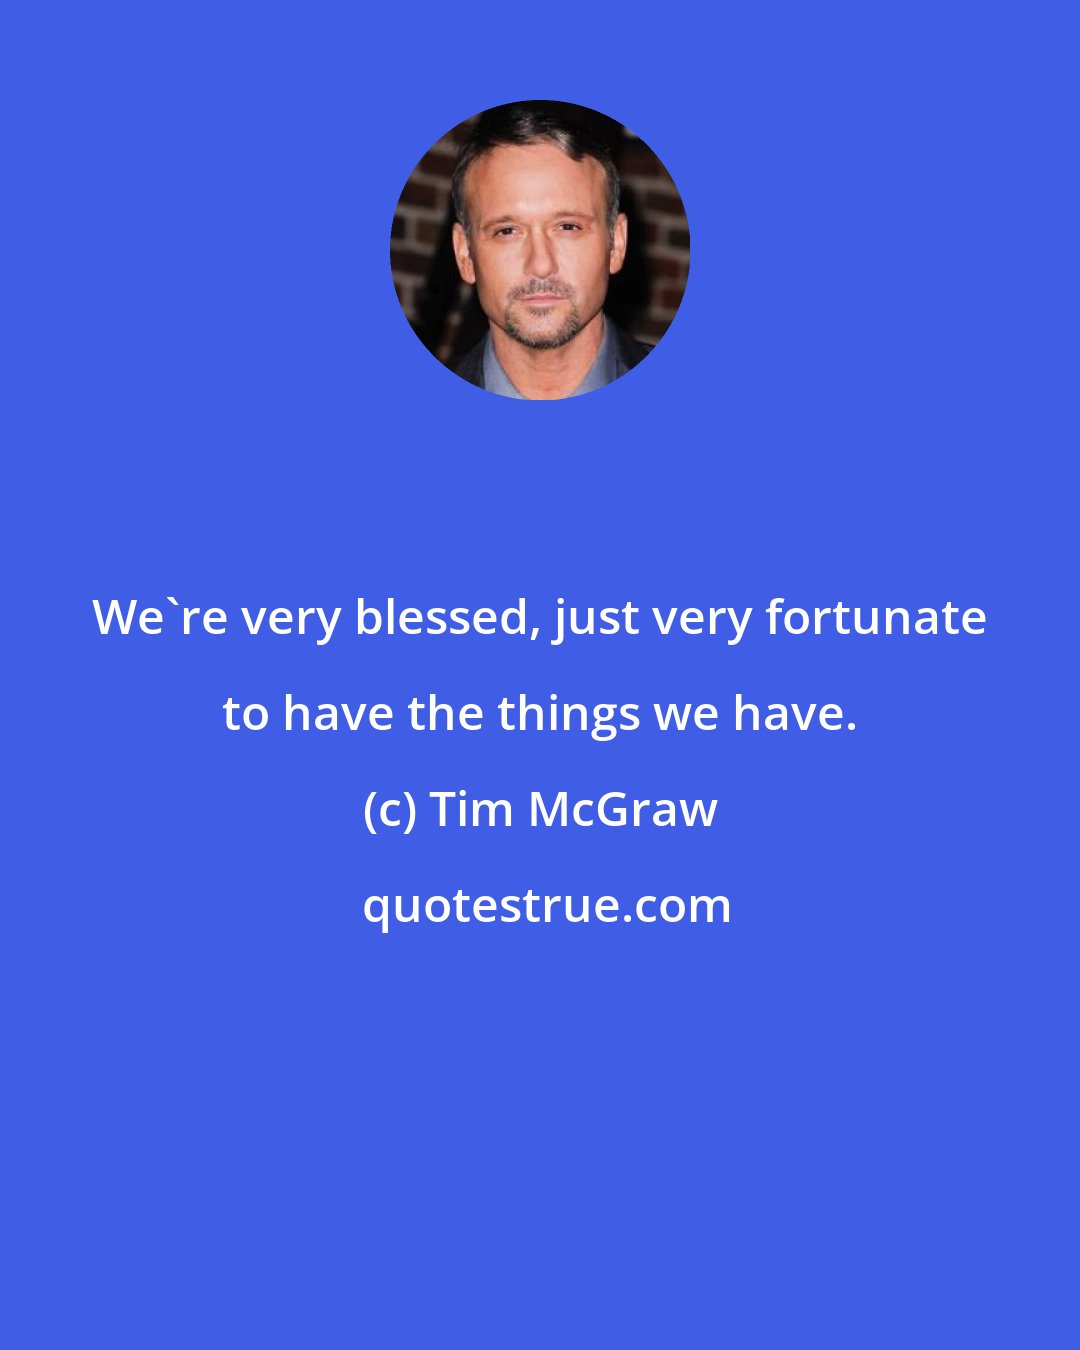 Tim McGraw: We're very blessed, just very fortunate to have the things we have.